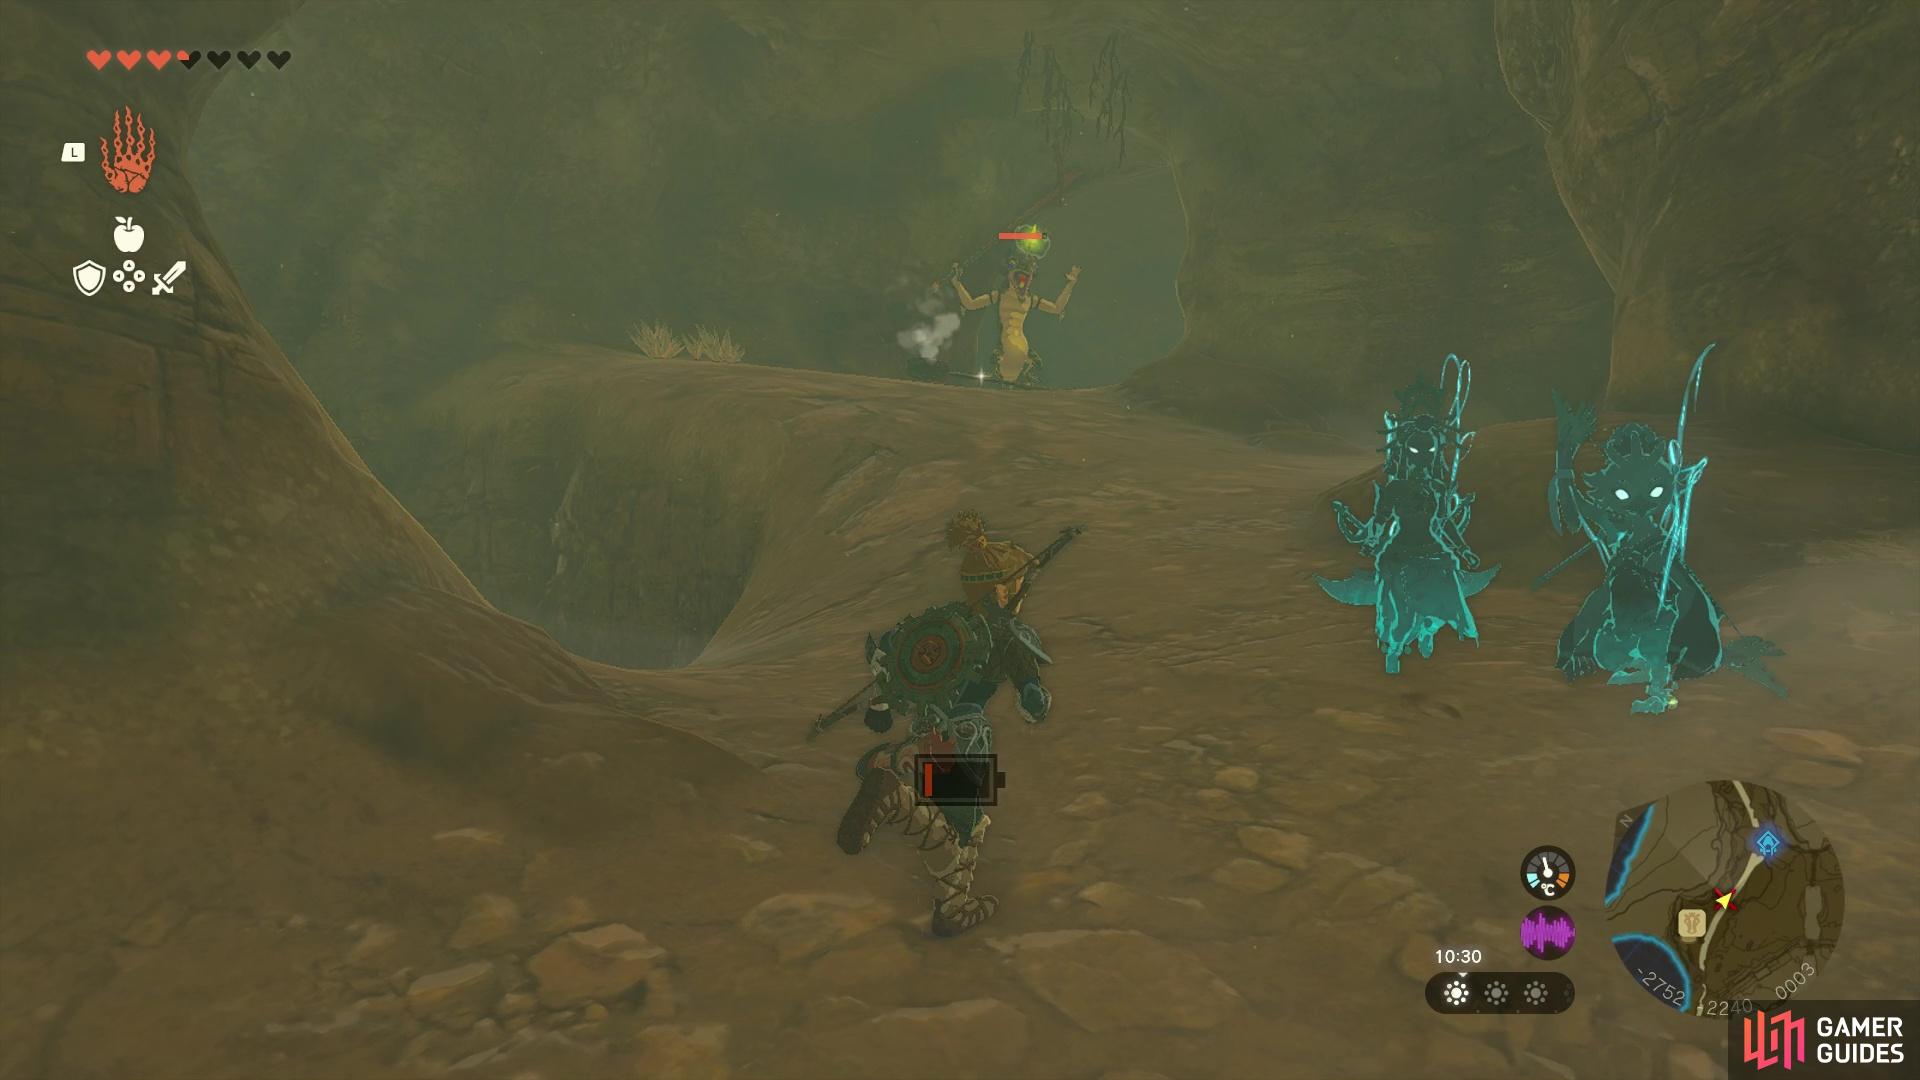 The Lizalfos enemy at the back is strong.